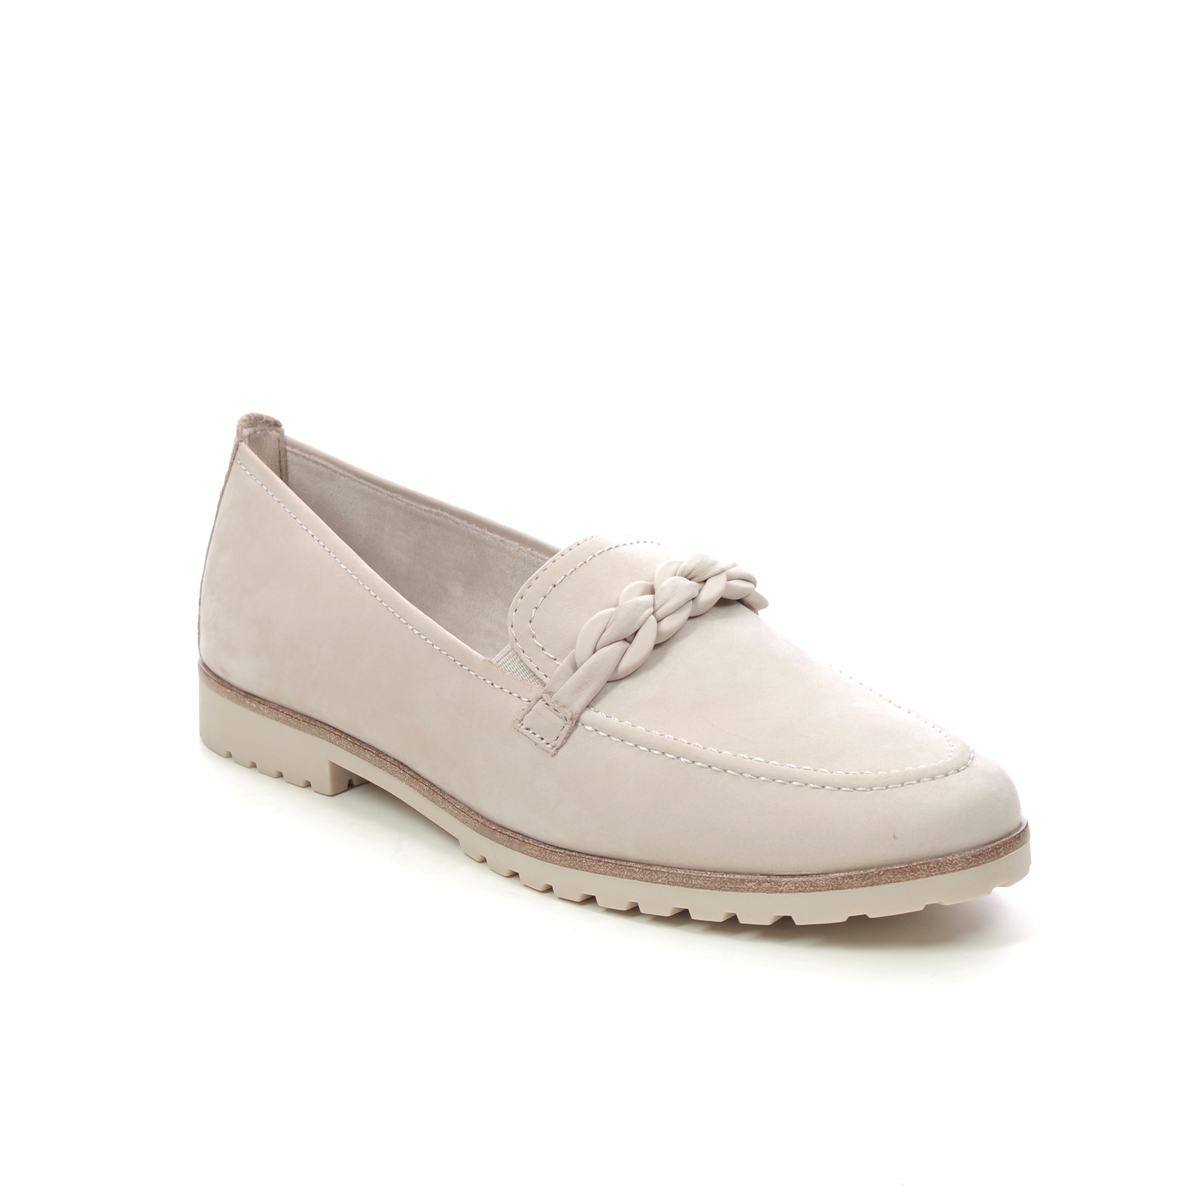 Intensiv Identificere Soaked Tamaris Careen Loafer 24200-20-341 Light Taupe nubuck loafers